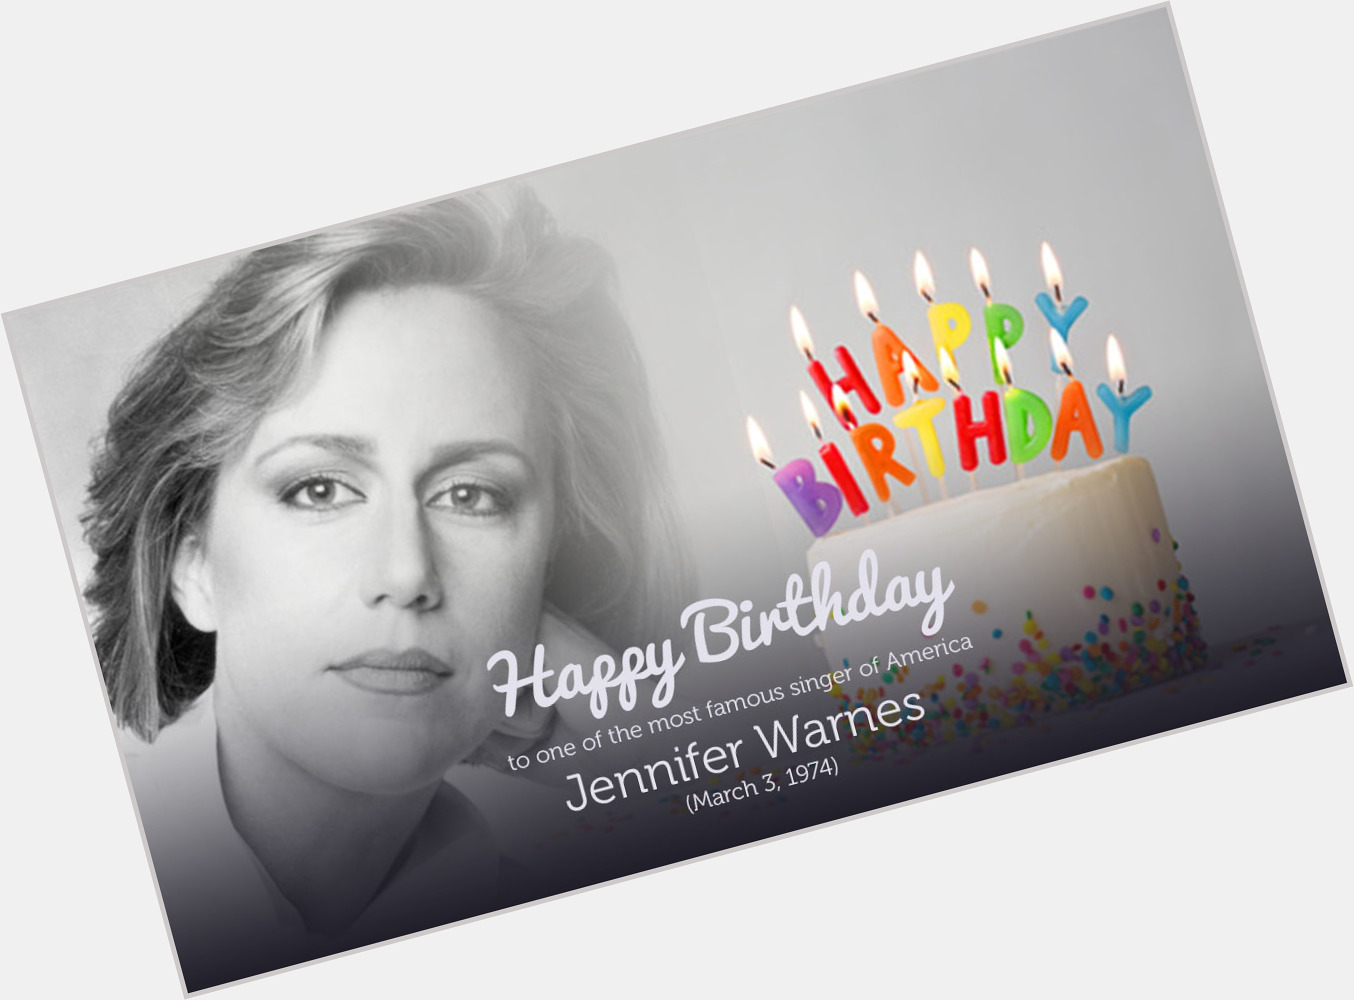 Happy Birthday to one of the most famous singer of America Jennifer Warnes. (March 3, 1974) 